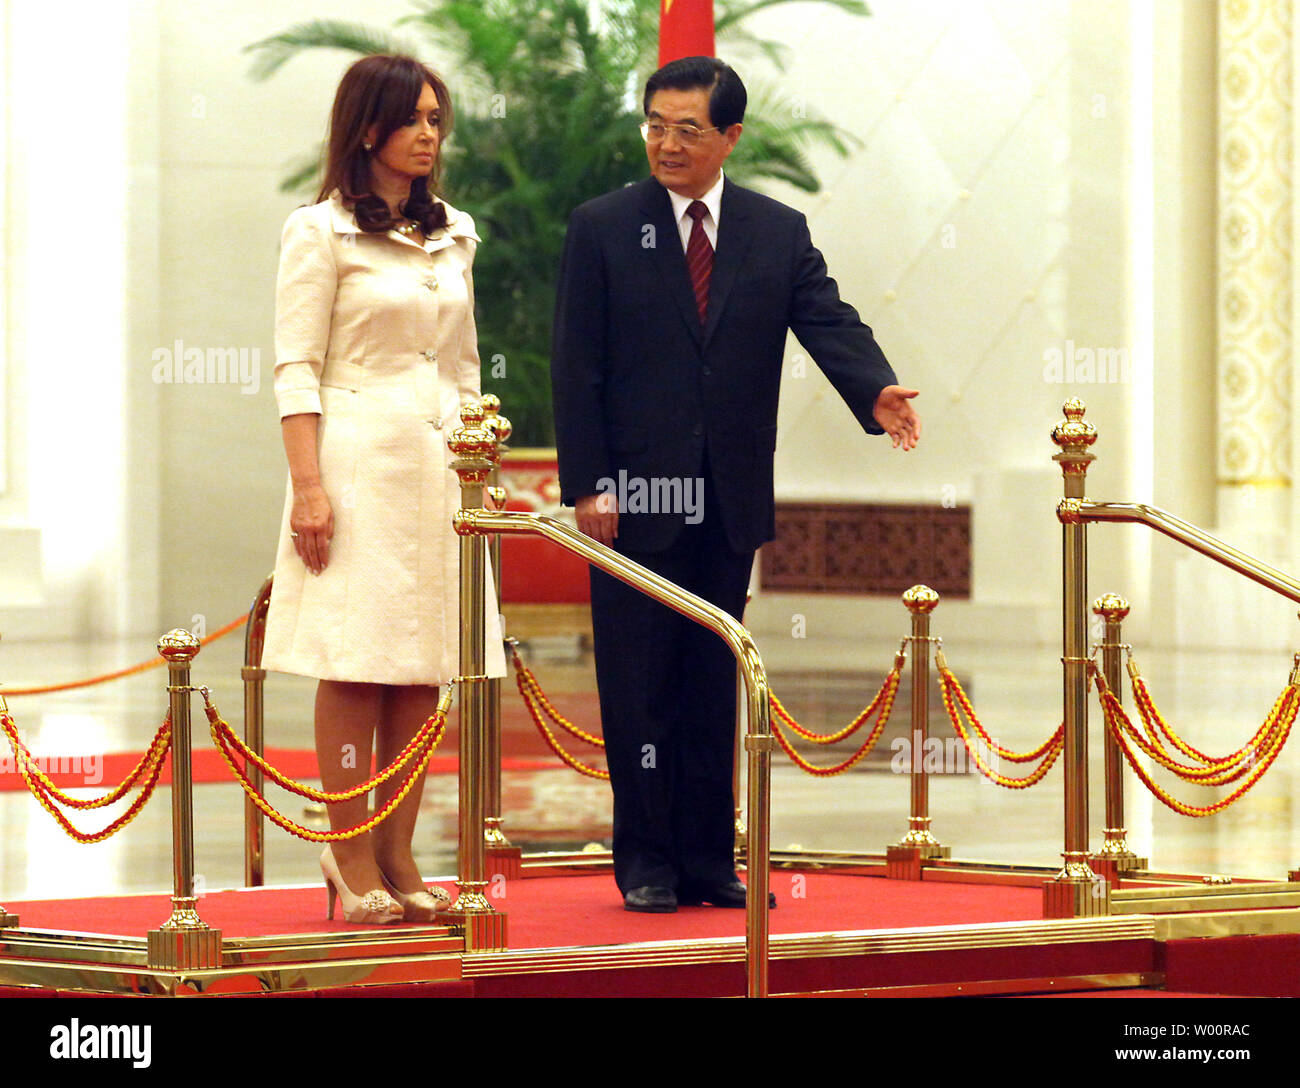 Argentina's President Cristina Kirchner de Fernandez (L) is escorted by Chinese President Hu Jintao during a welcoming ceremony at the Great Hall of the People in Beijing on July 13, 2010.  China and Argentina agreed on contracts for railway projects in the South American country totaling 10 billion dollars.    UPI/Stephen Shaver Stock Photo